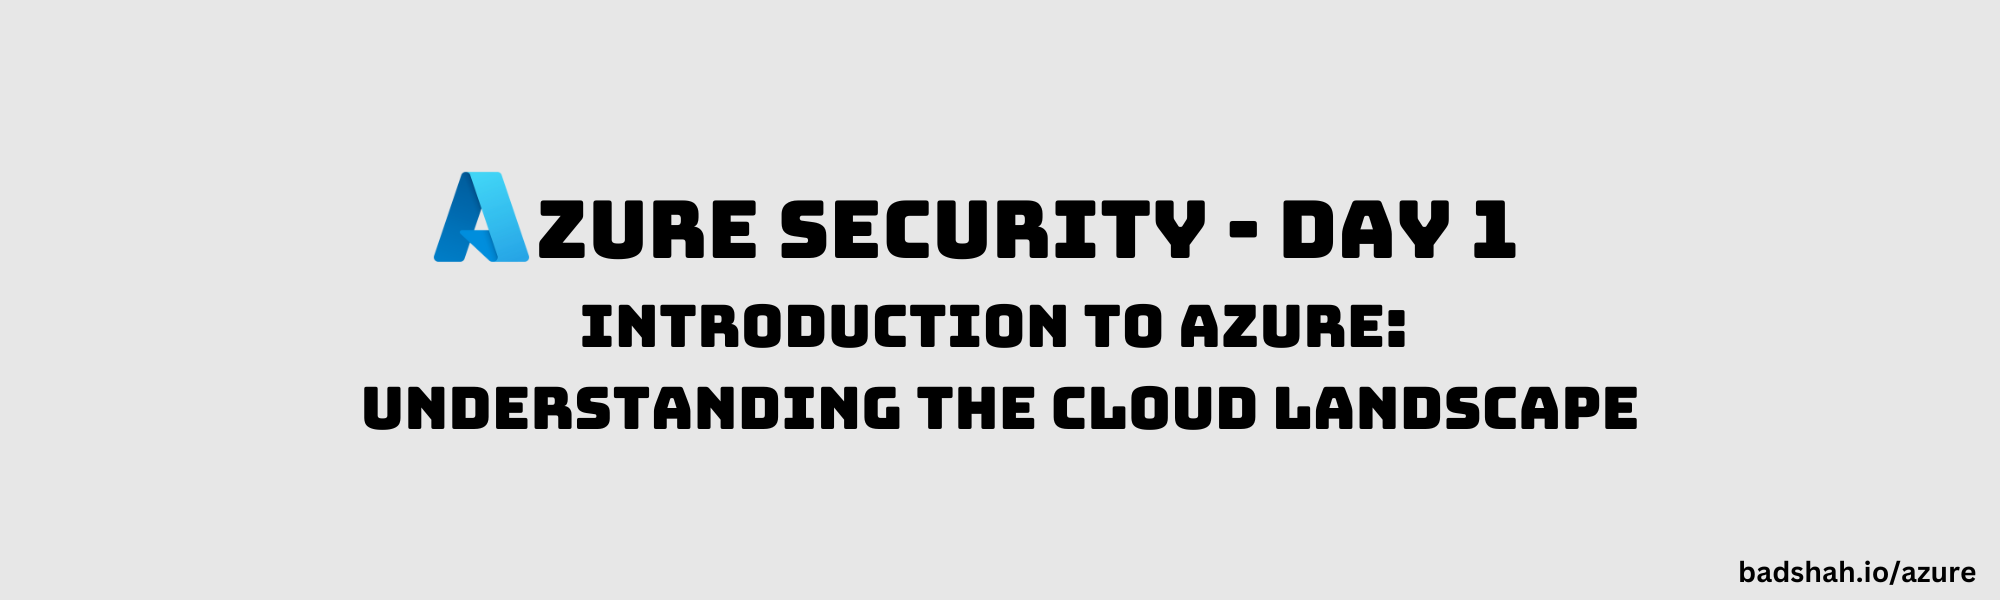 /azure/introduction/cover-image.png